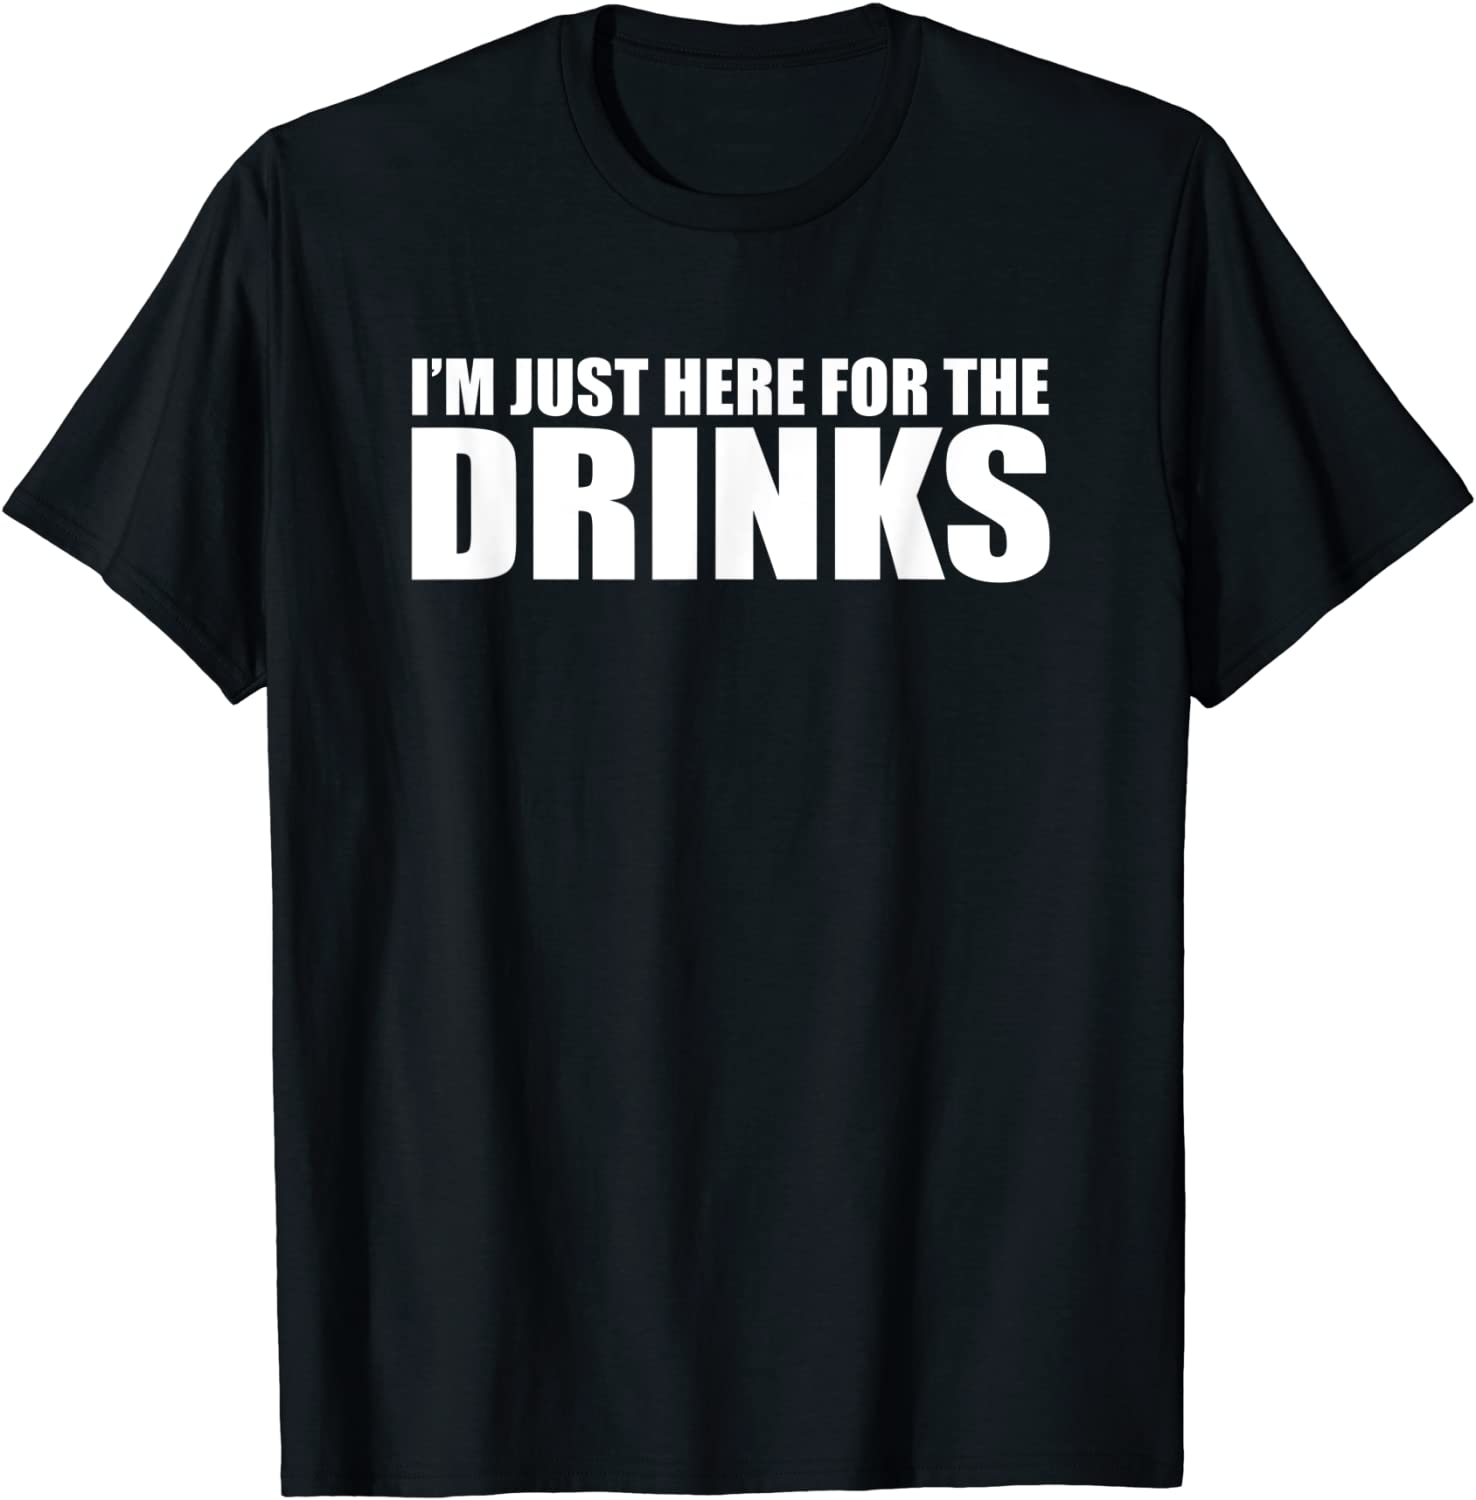 I’M JUST HERE FOR THE DRINKS Tee Shirt - ShirtElephant Office